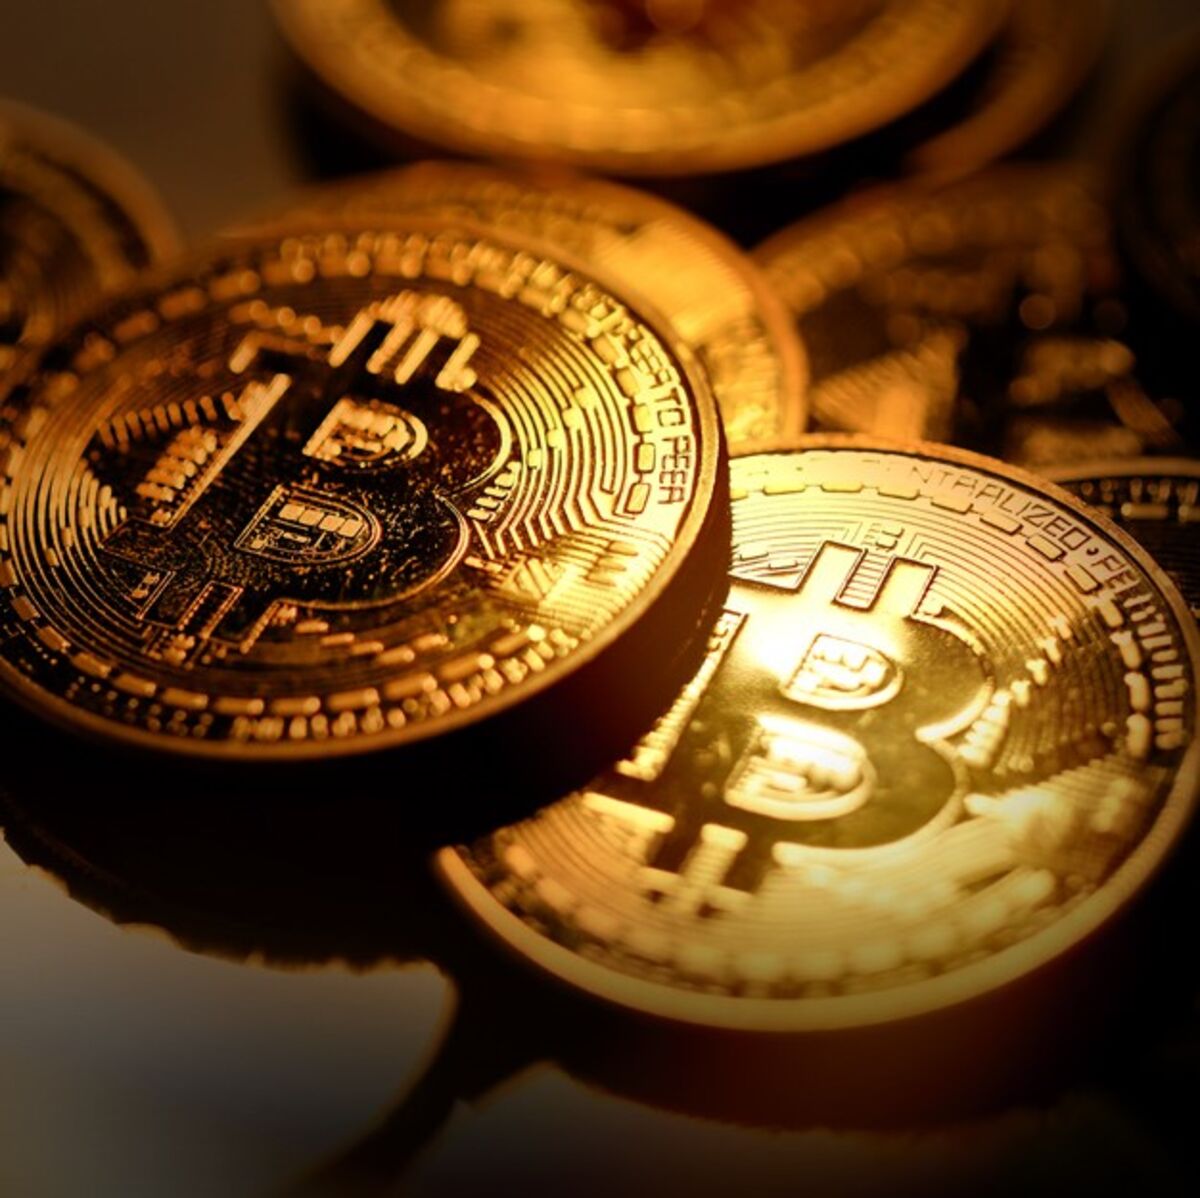 Bloomberg New Economy: Central Banks May Soon Be Coming for Bitcoin